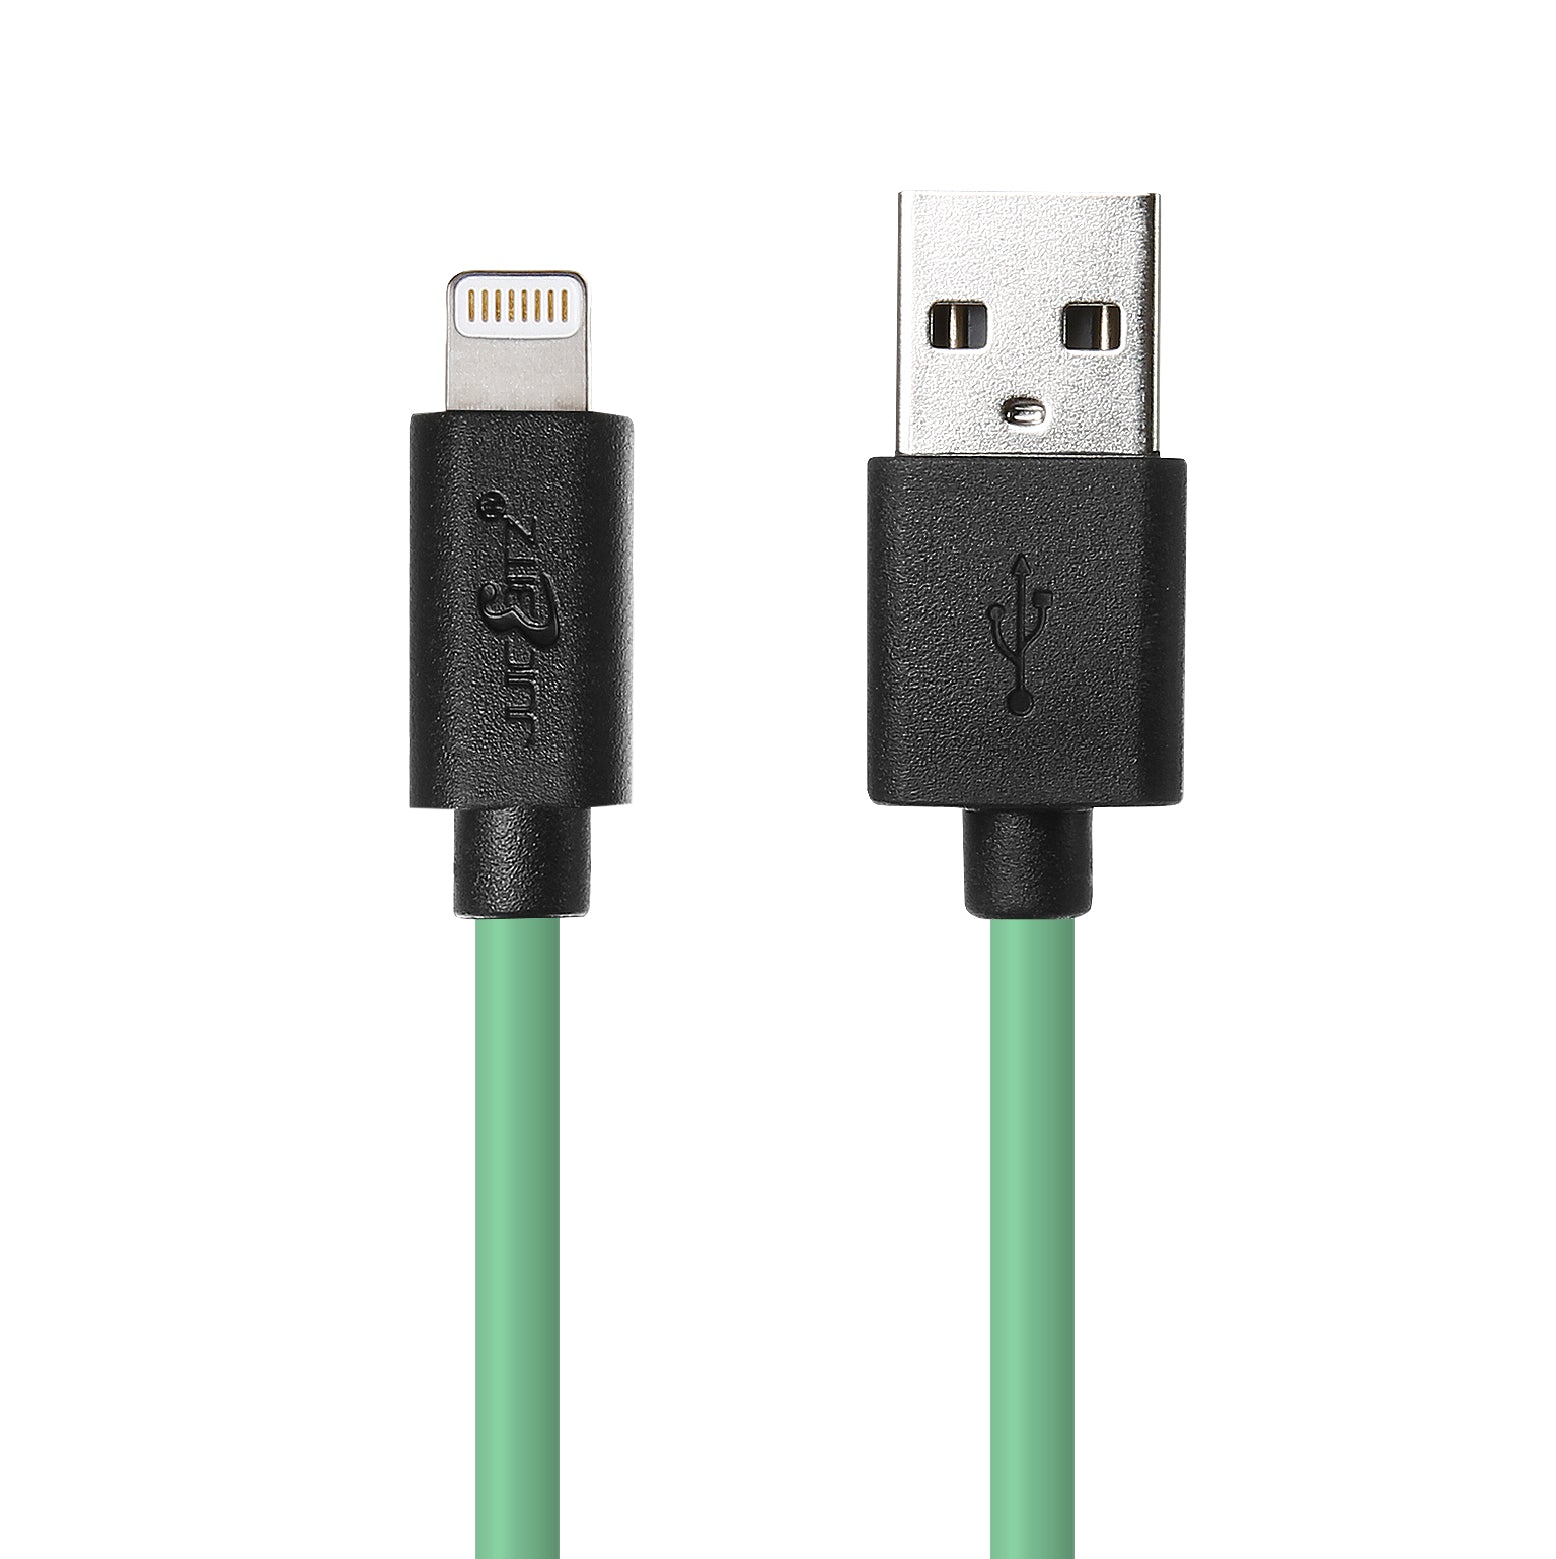 USB Charger Cable Data Sync Lead for iPhone, iPad, iPod - Green